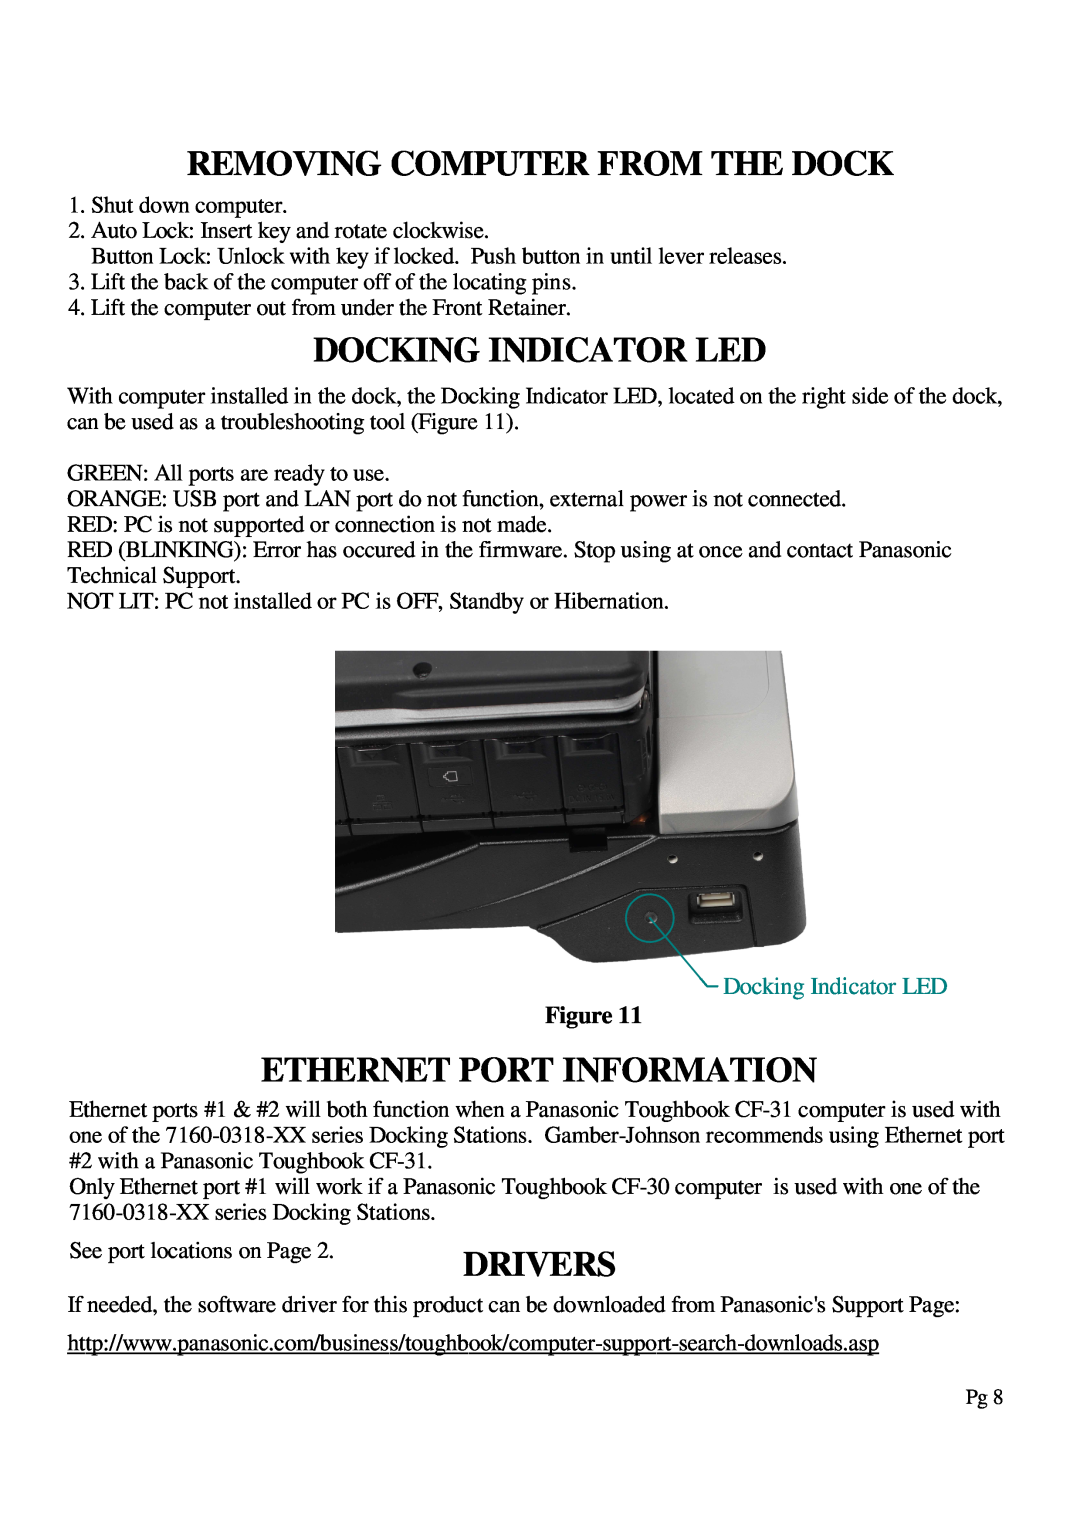 Gamber Johnson 7160-0318-06 Removing Computer From The Dock, Docking Indicator Led, Ethernet Port Information, Drivers 